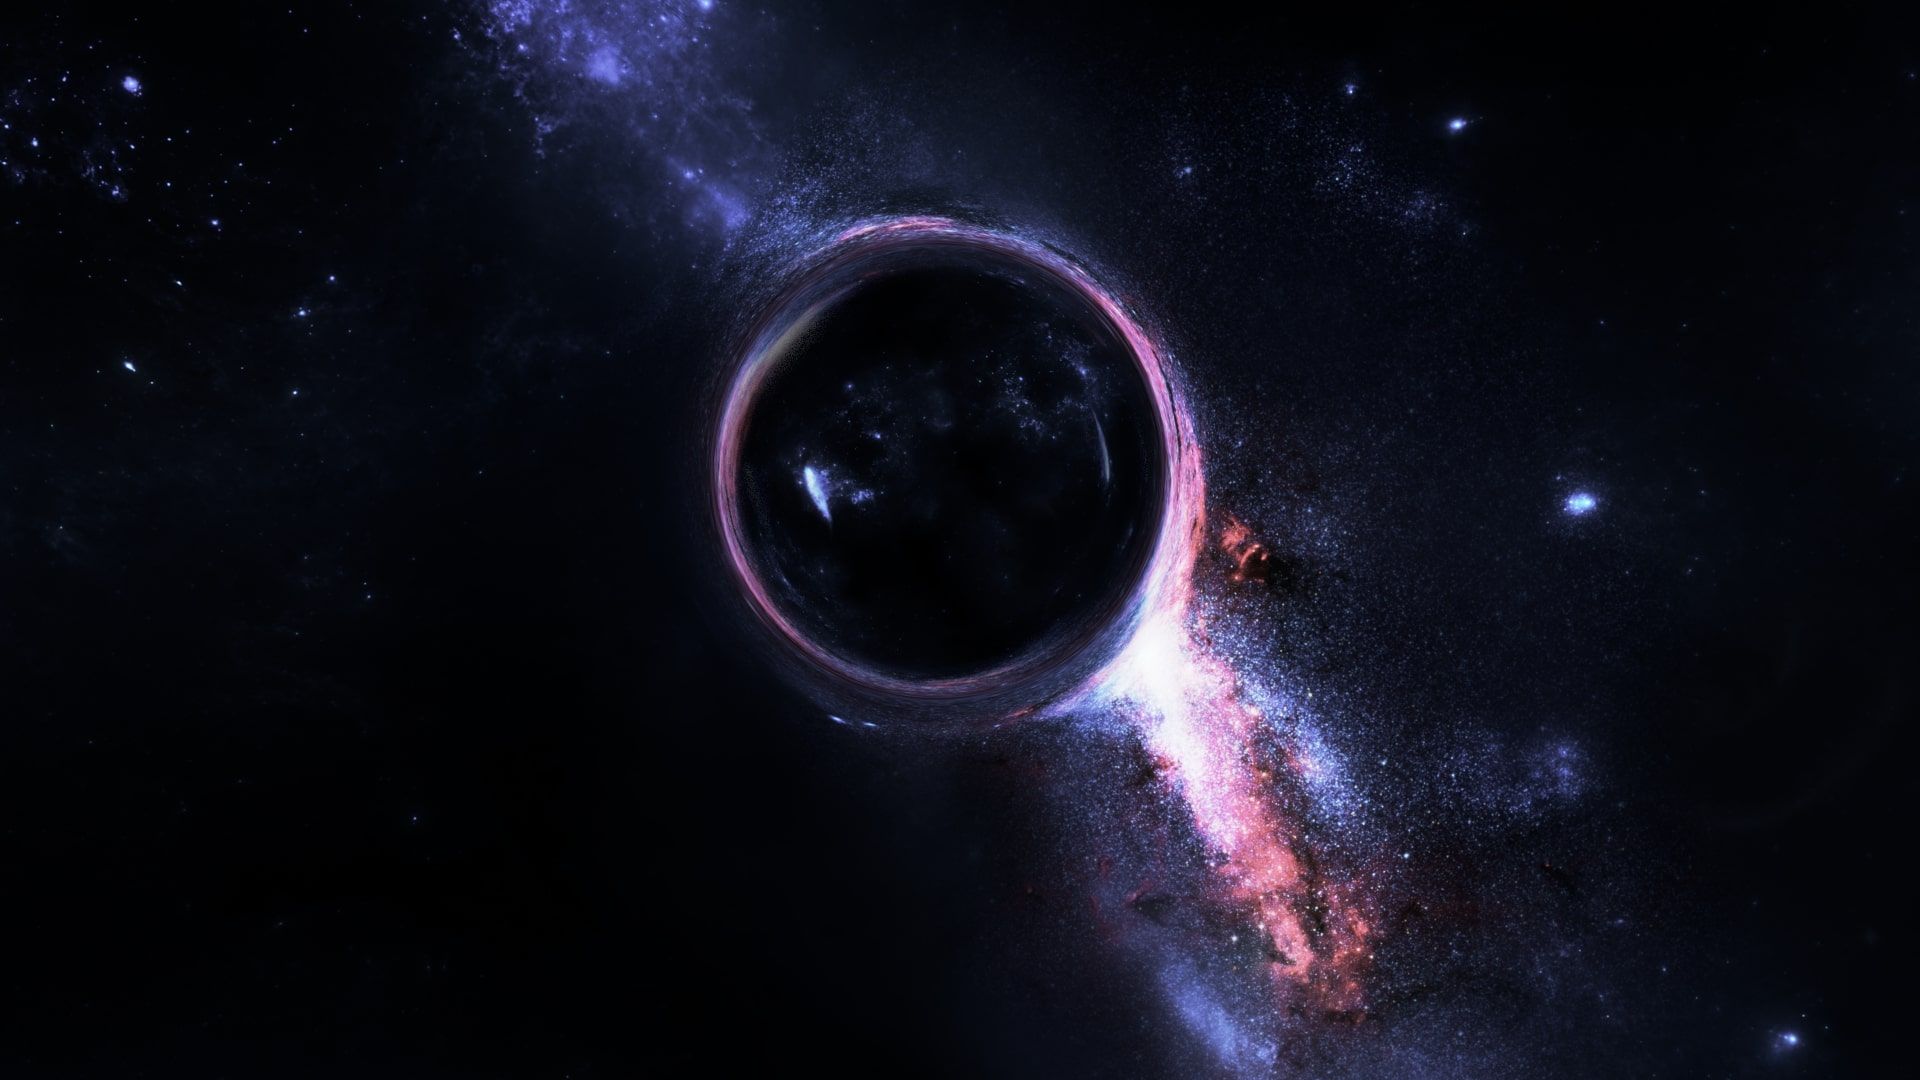 Wallpaper Of Black Hole, Space, Galaxy Background & Wallpaper Black Hole